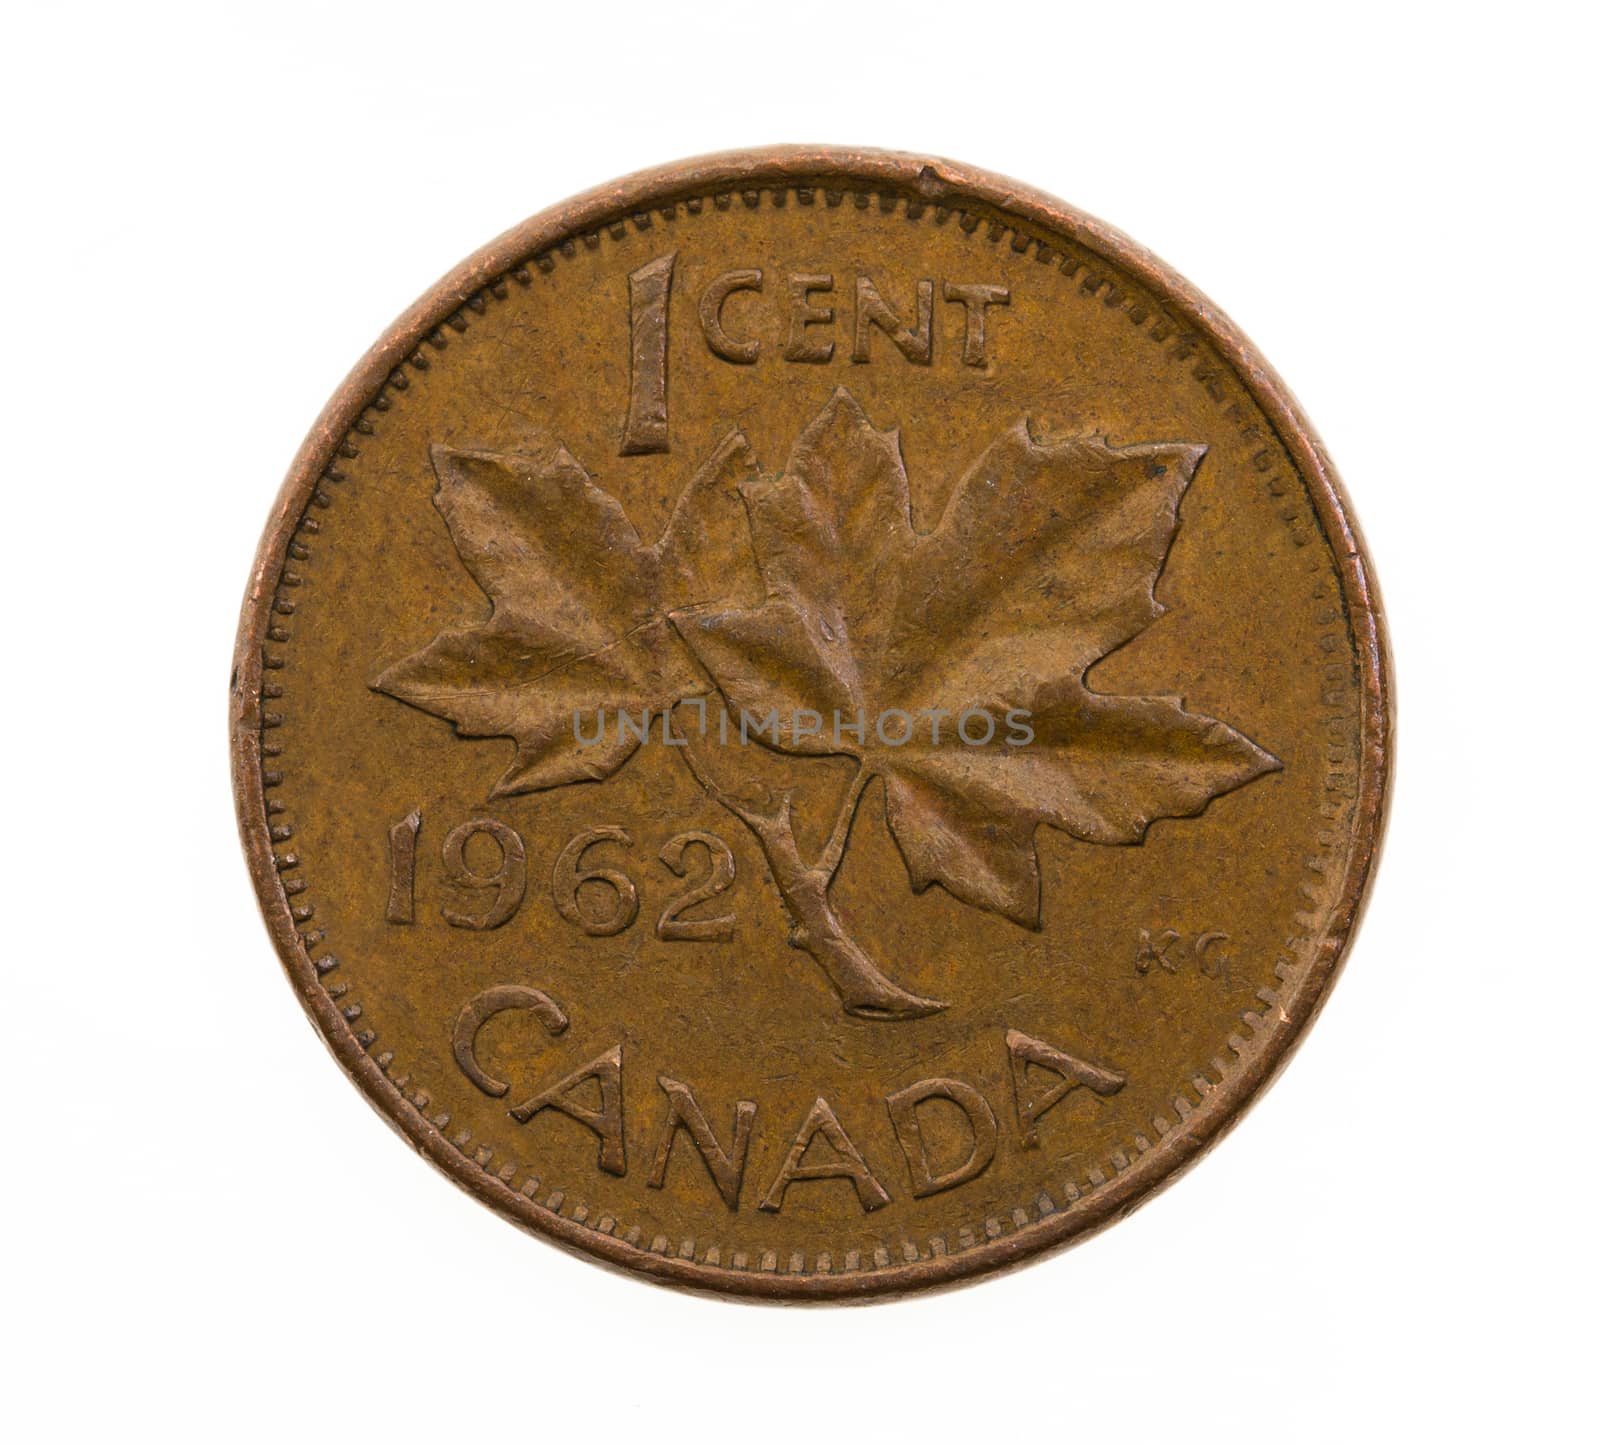 one Canadian cent  by avq